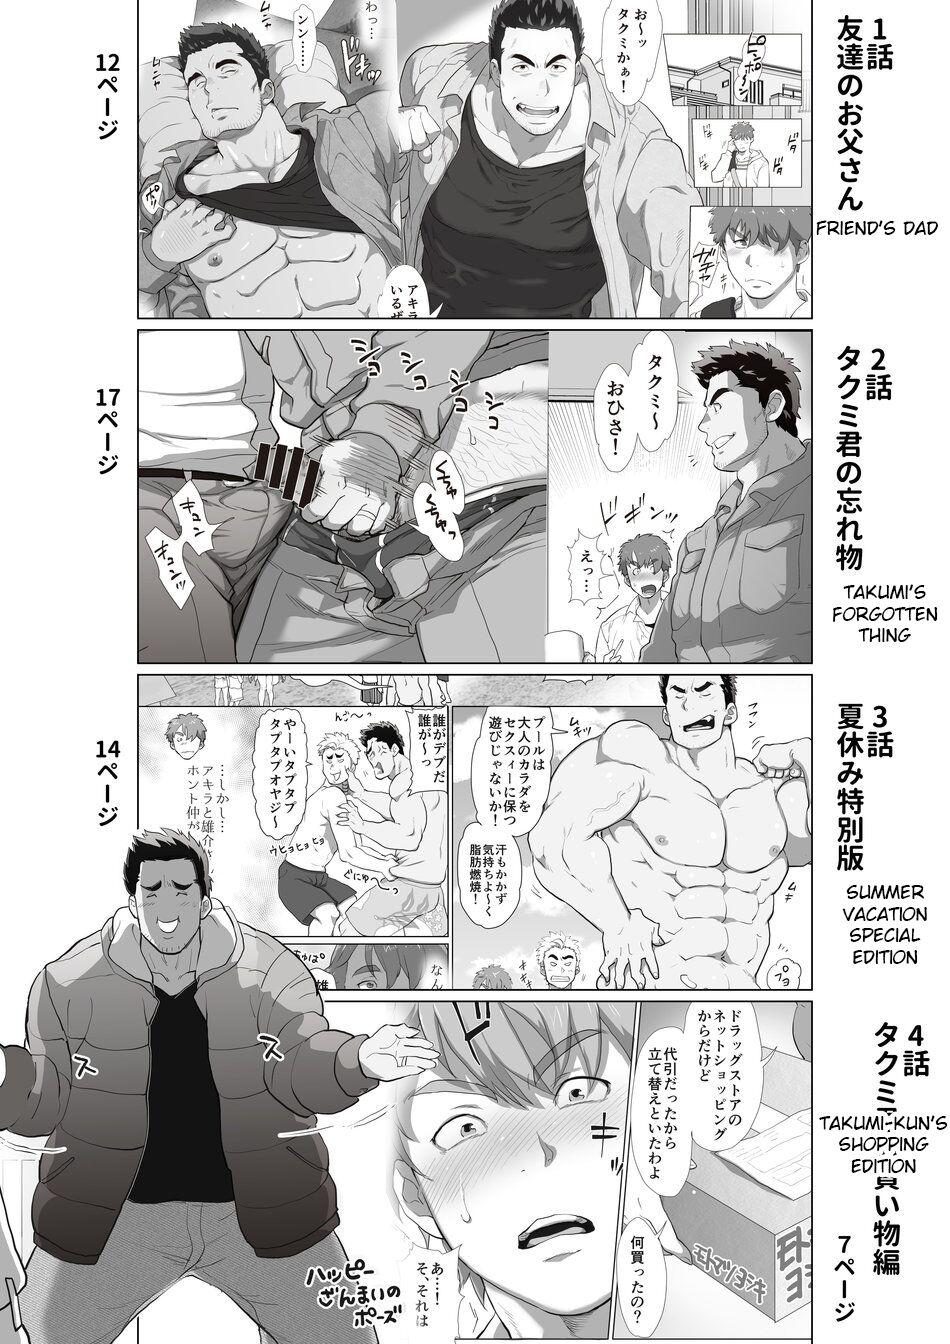 Friend’s dad Chapter 1 1